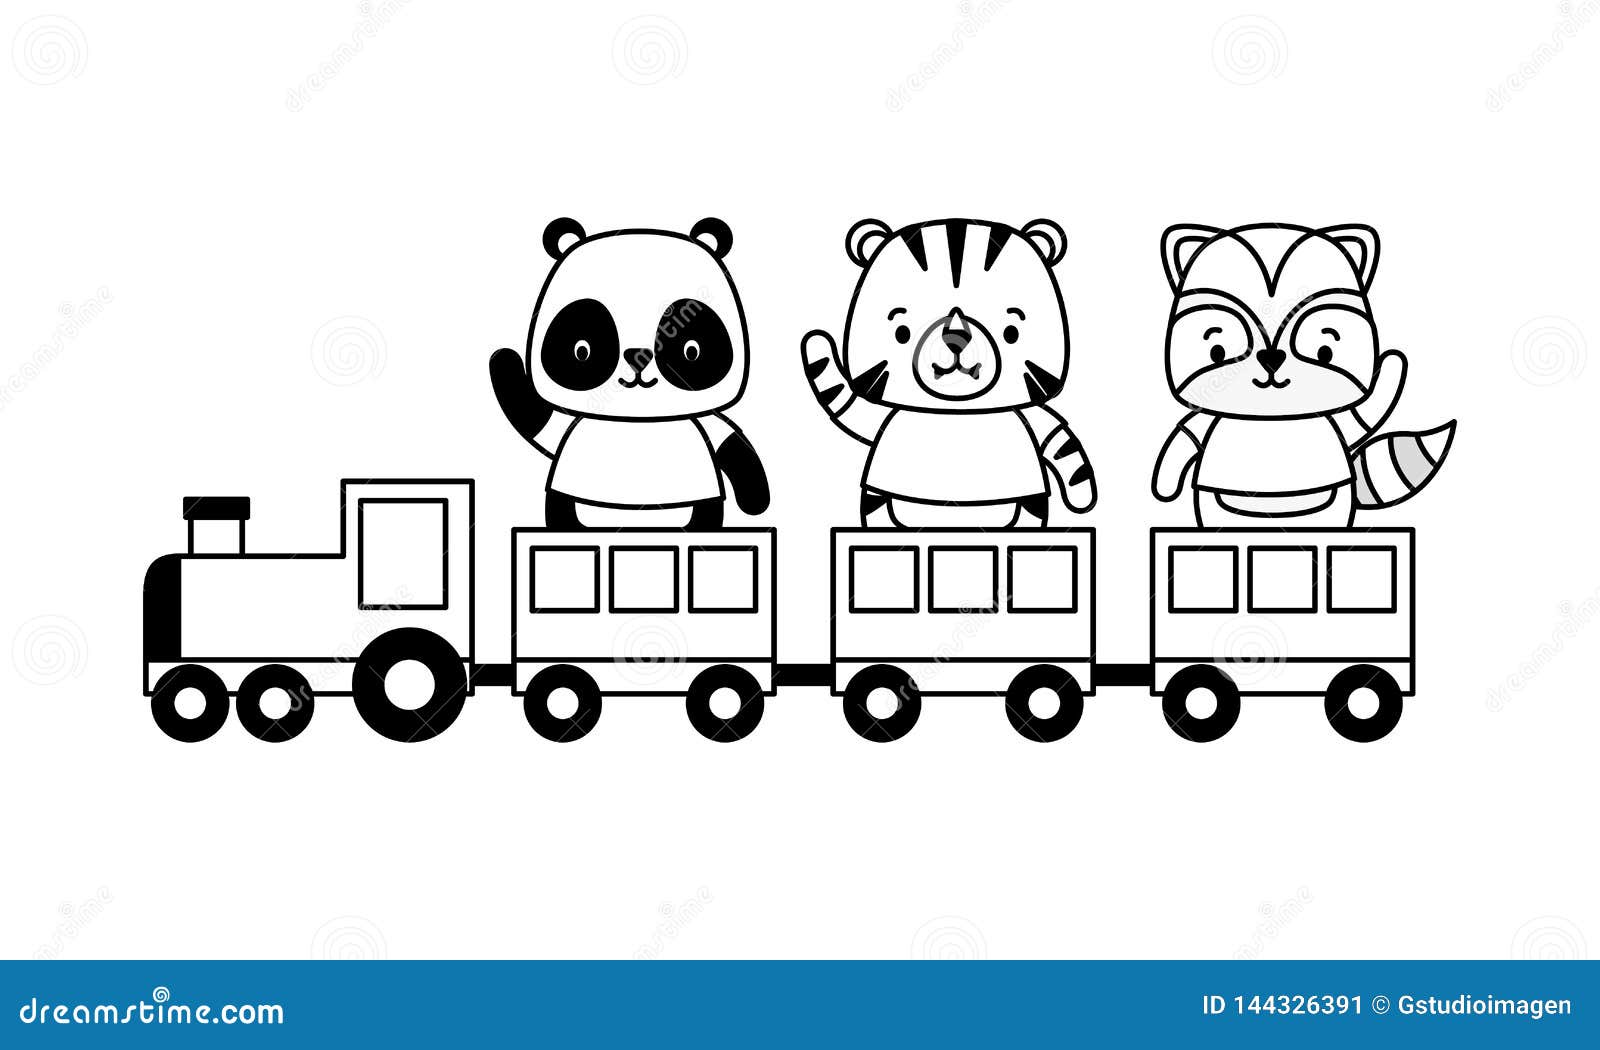 Cute animals train toy stock vector. Illustration of vehicle - 144326391